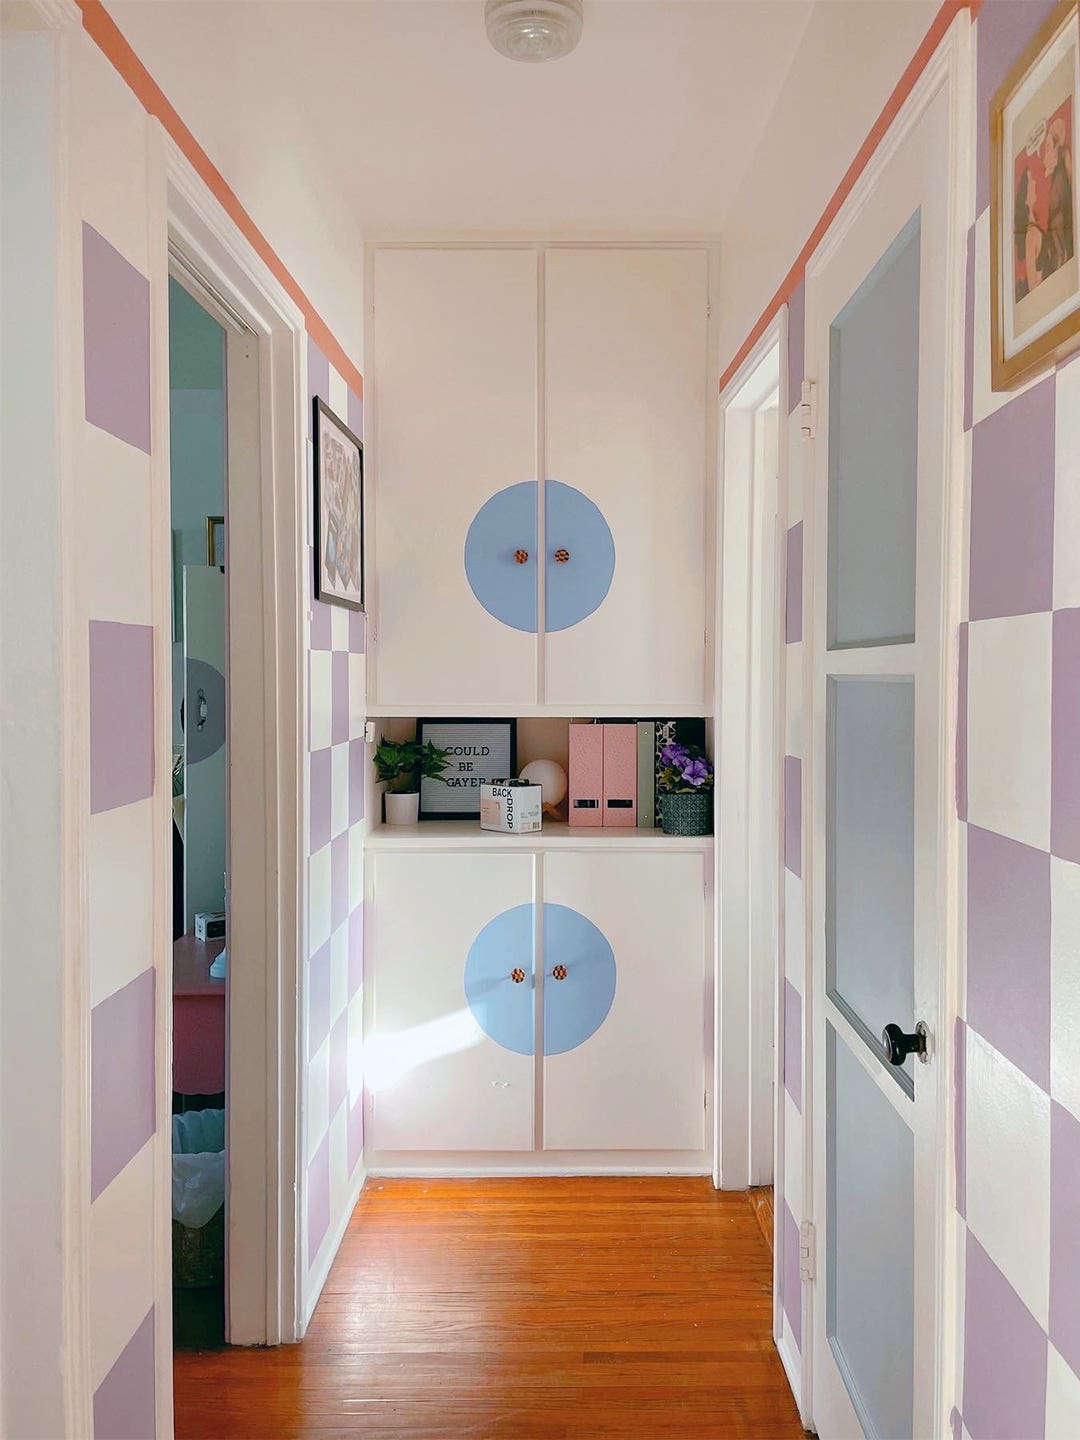 Hallway with Checkered Walls and Blue circle cabinets